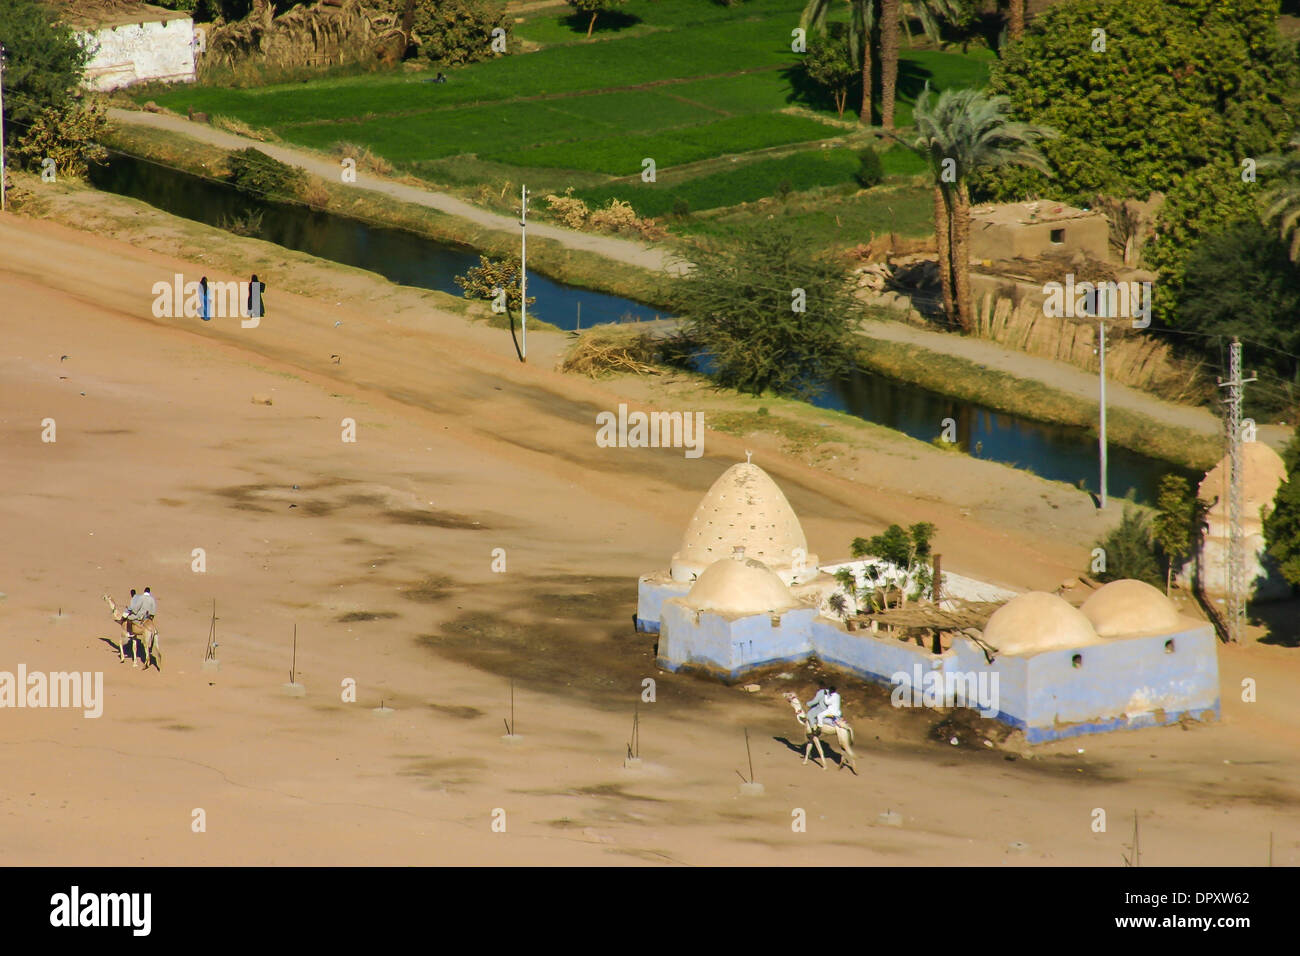 Camel riding on west bank of Nile River near Aswan, Egypt. Stock Photo